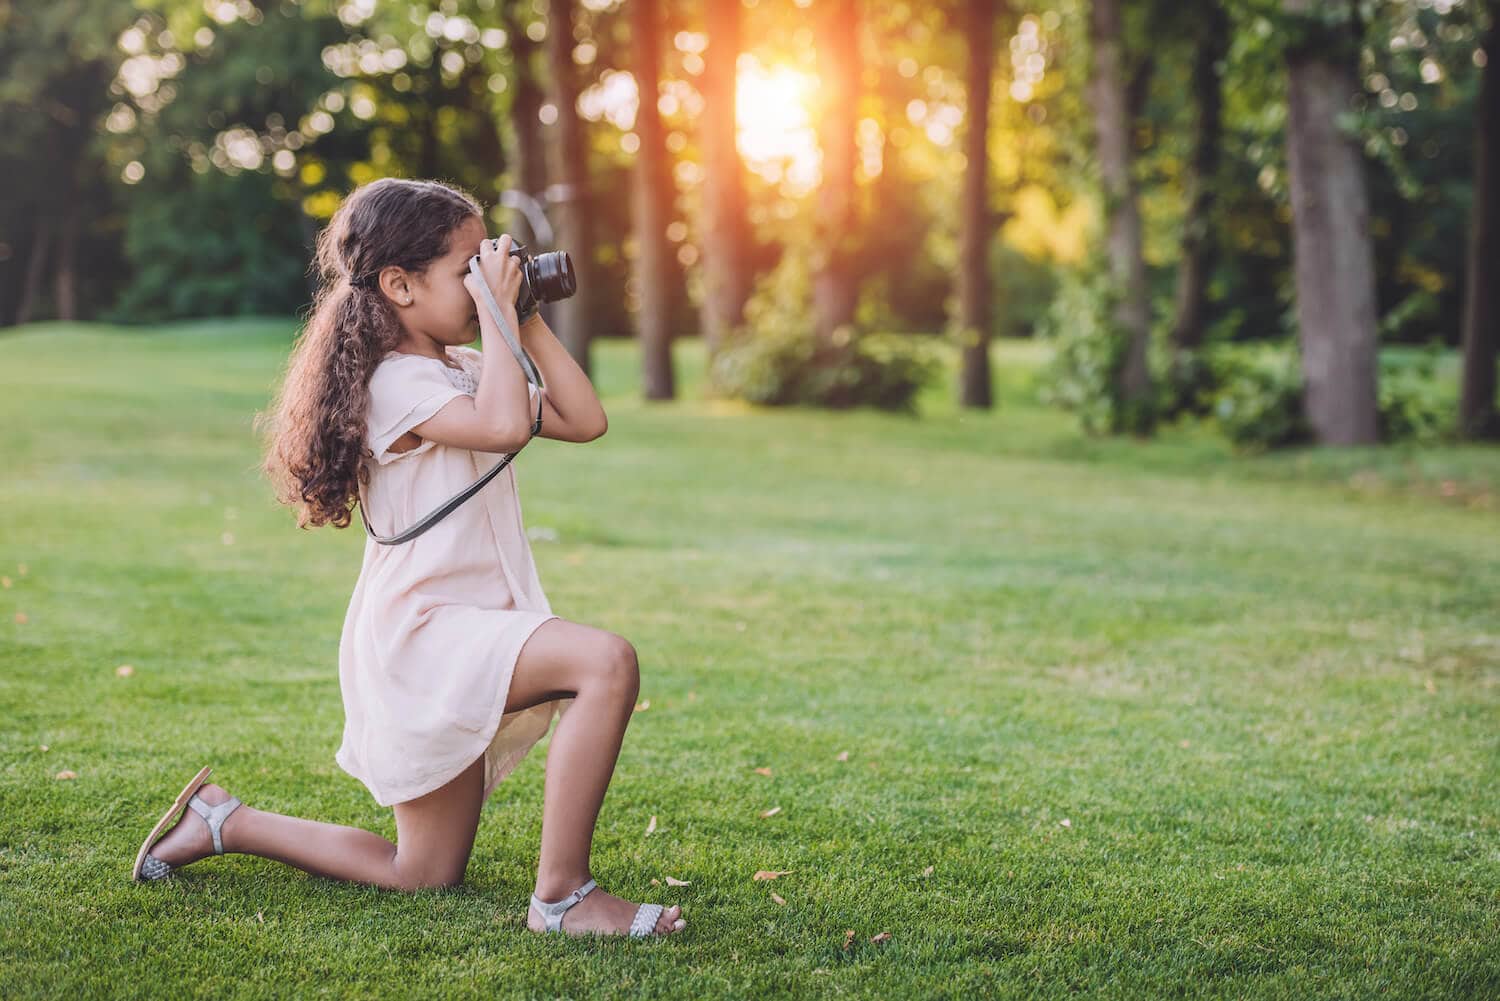 A girl in a pink dress is taking photos outdoors.